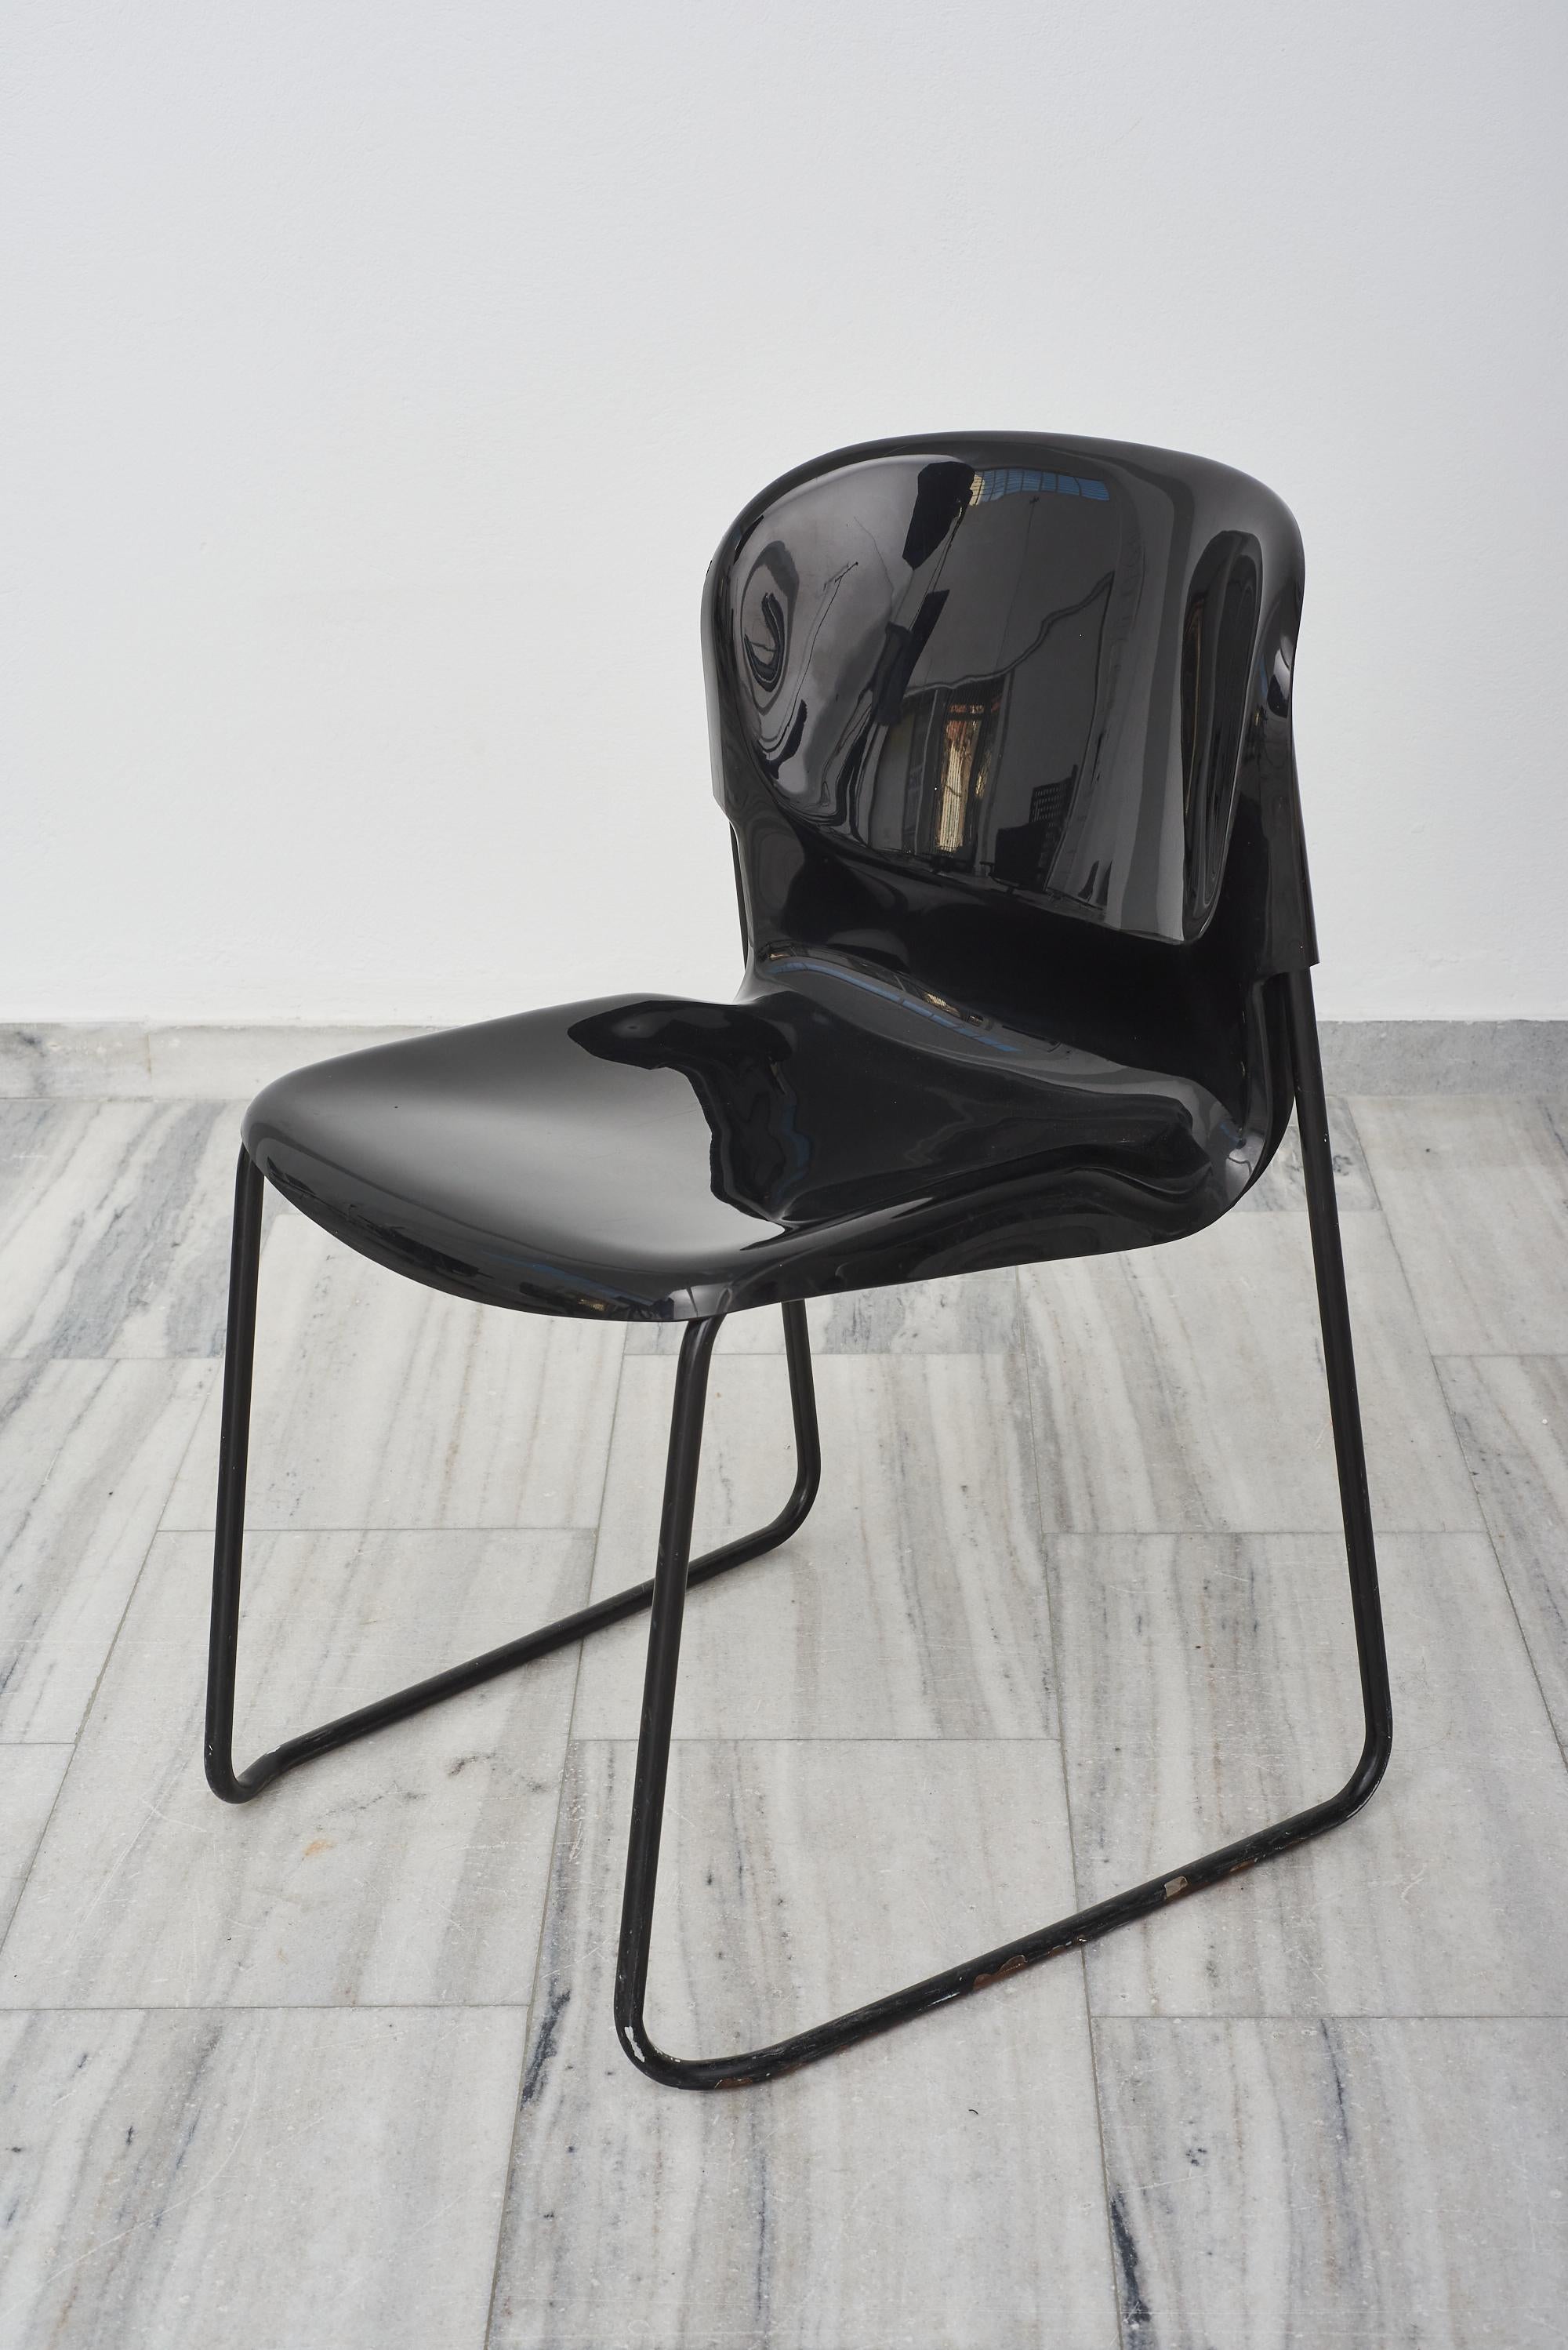 Black glossy stacking chair SM400 by Gerd Lange for West German manufacturer Drabert, 1980s.
Gerd Lange's chairs have been extremely successful.He had a decisive influence on the design history of the Federal Republic of Germany in the 1970s and